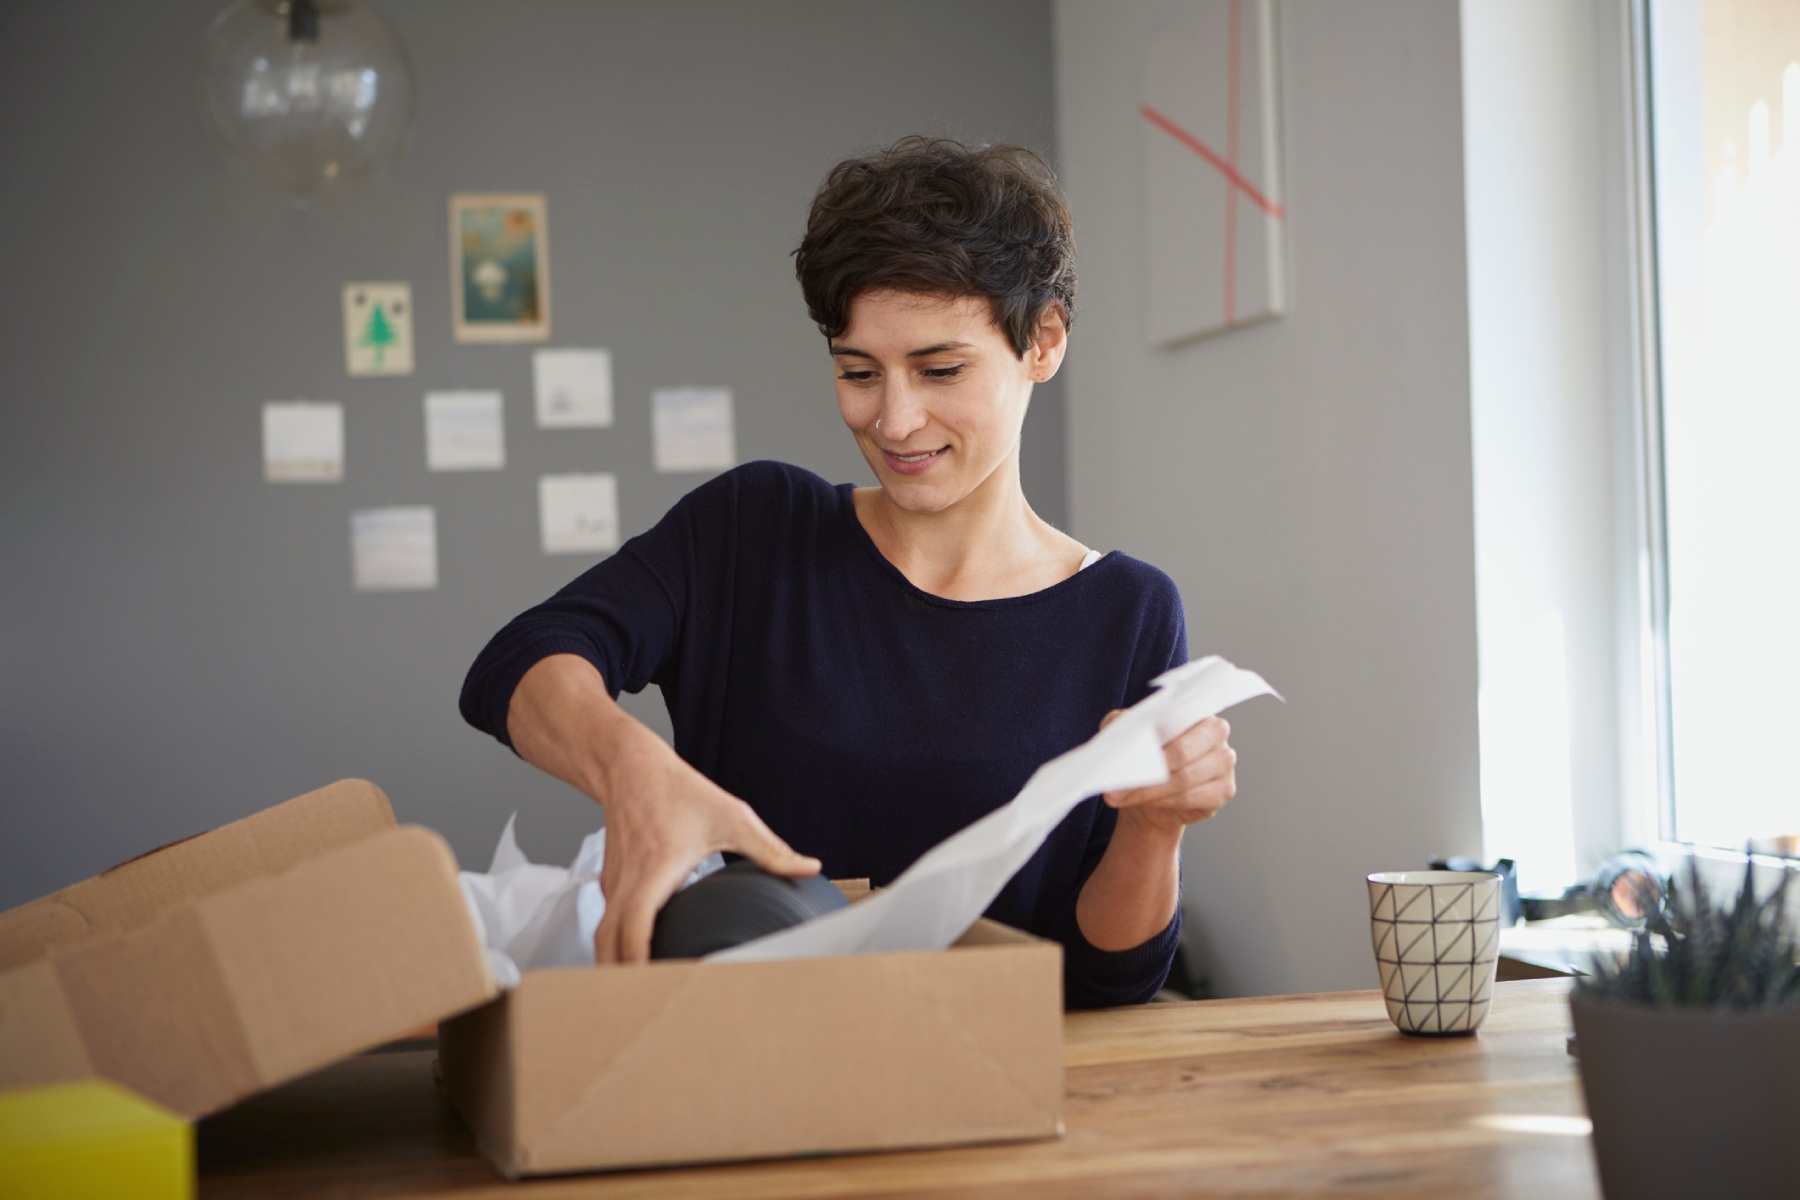 Smiling woman wrapping a package in a brown cardboard box and white paper